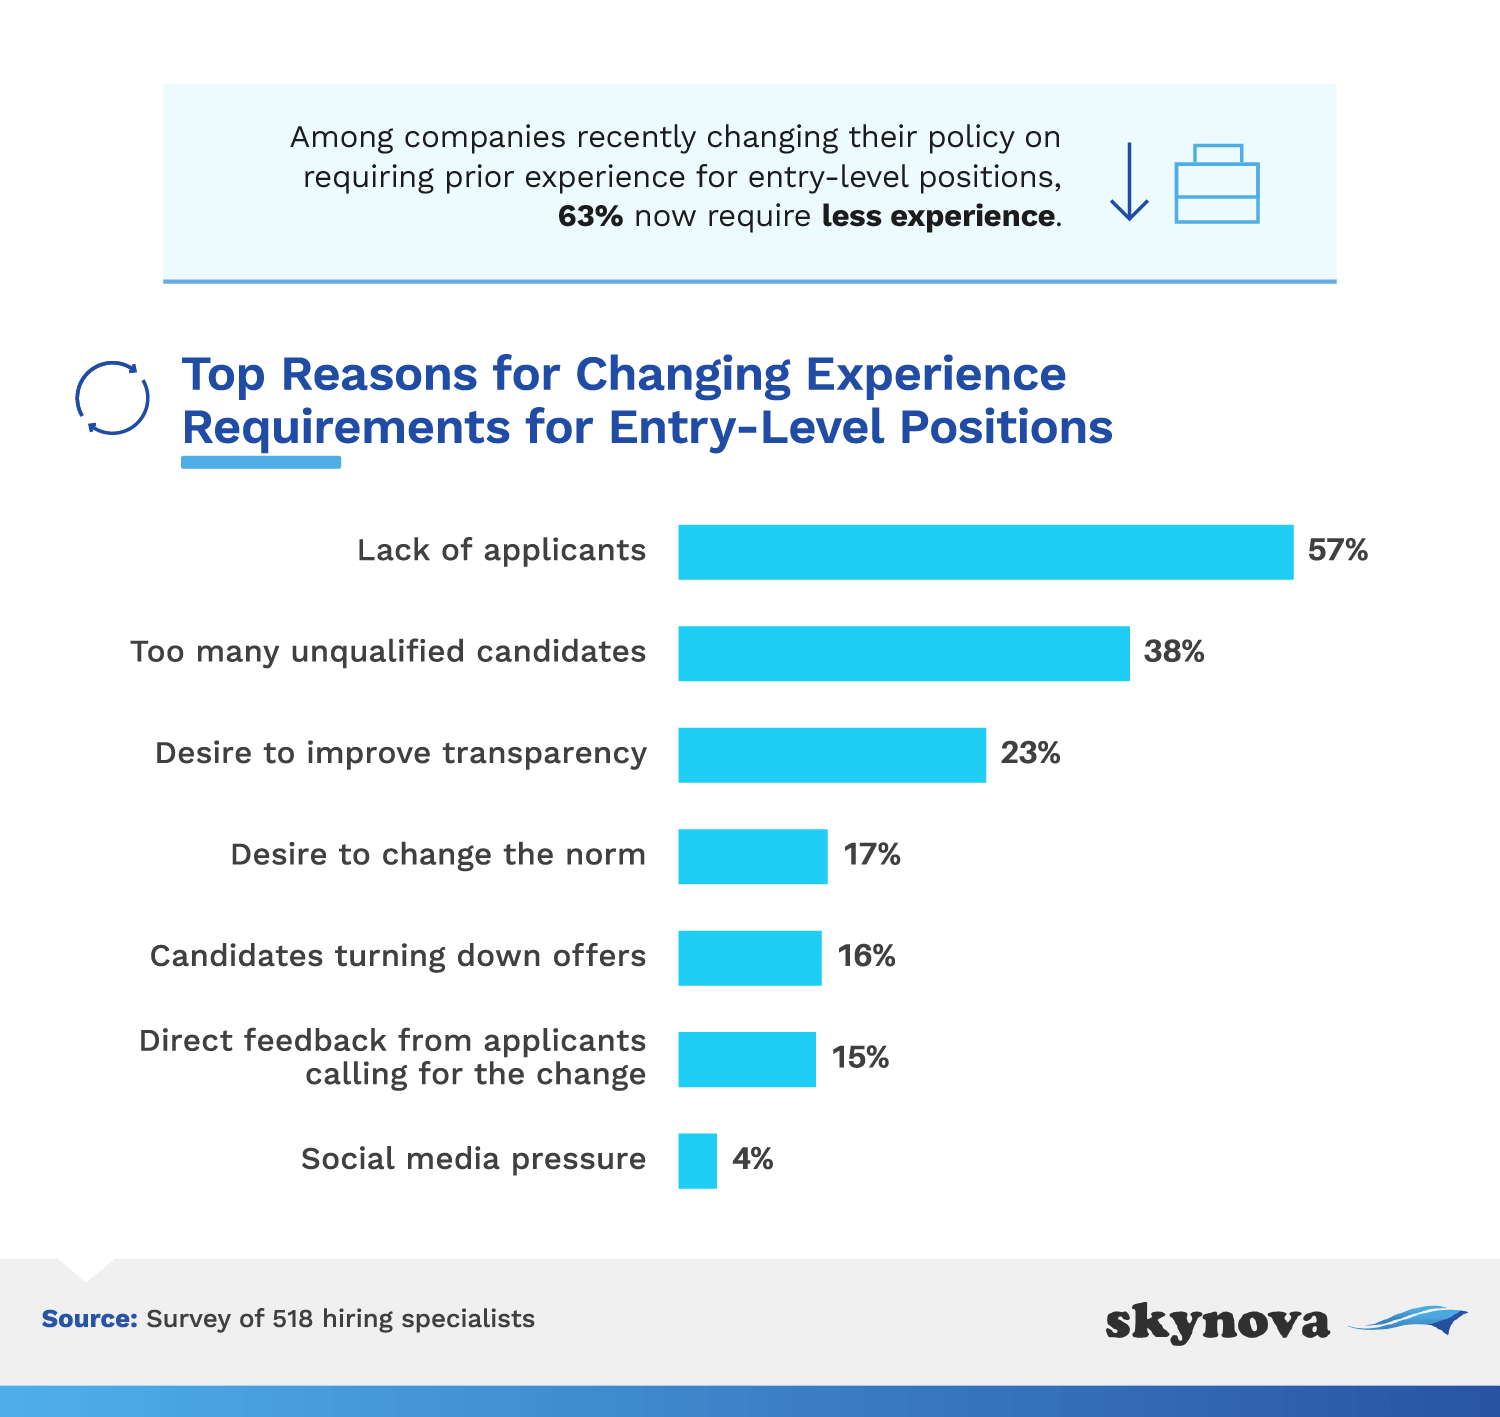 Top reasons why companies have changed experience requirements for entry-level positions